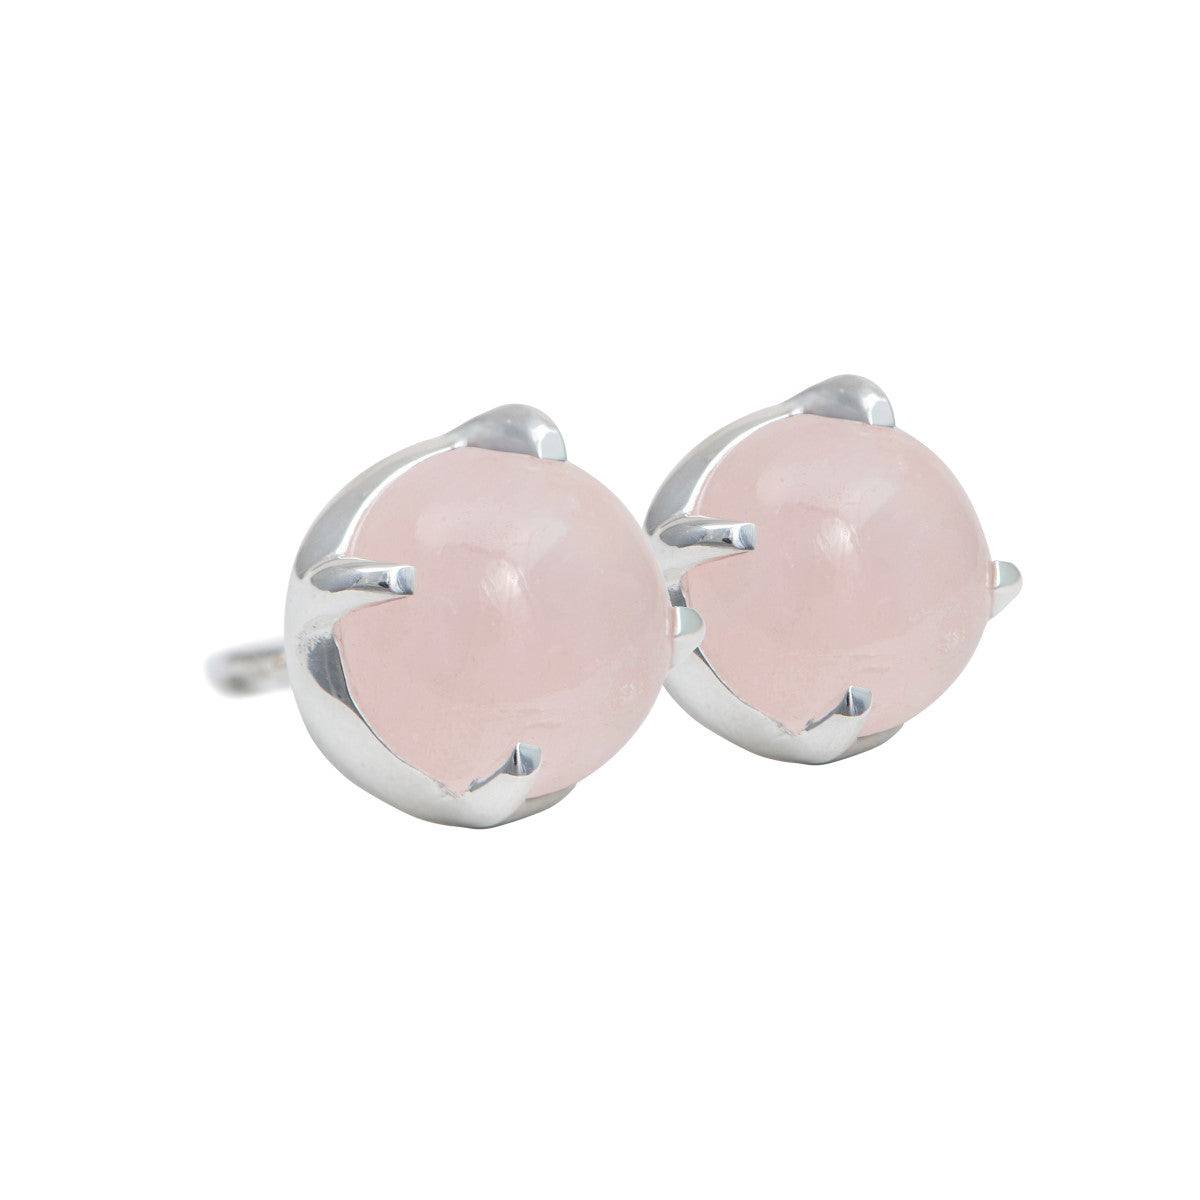 Round Cabochon Rose Quartz Stud Earrings in Sterling Silver